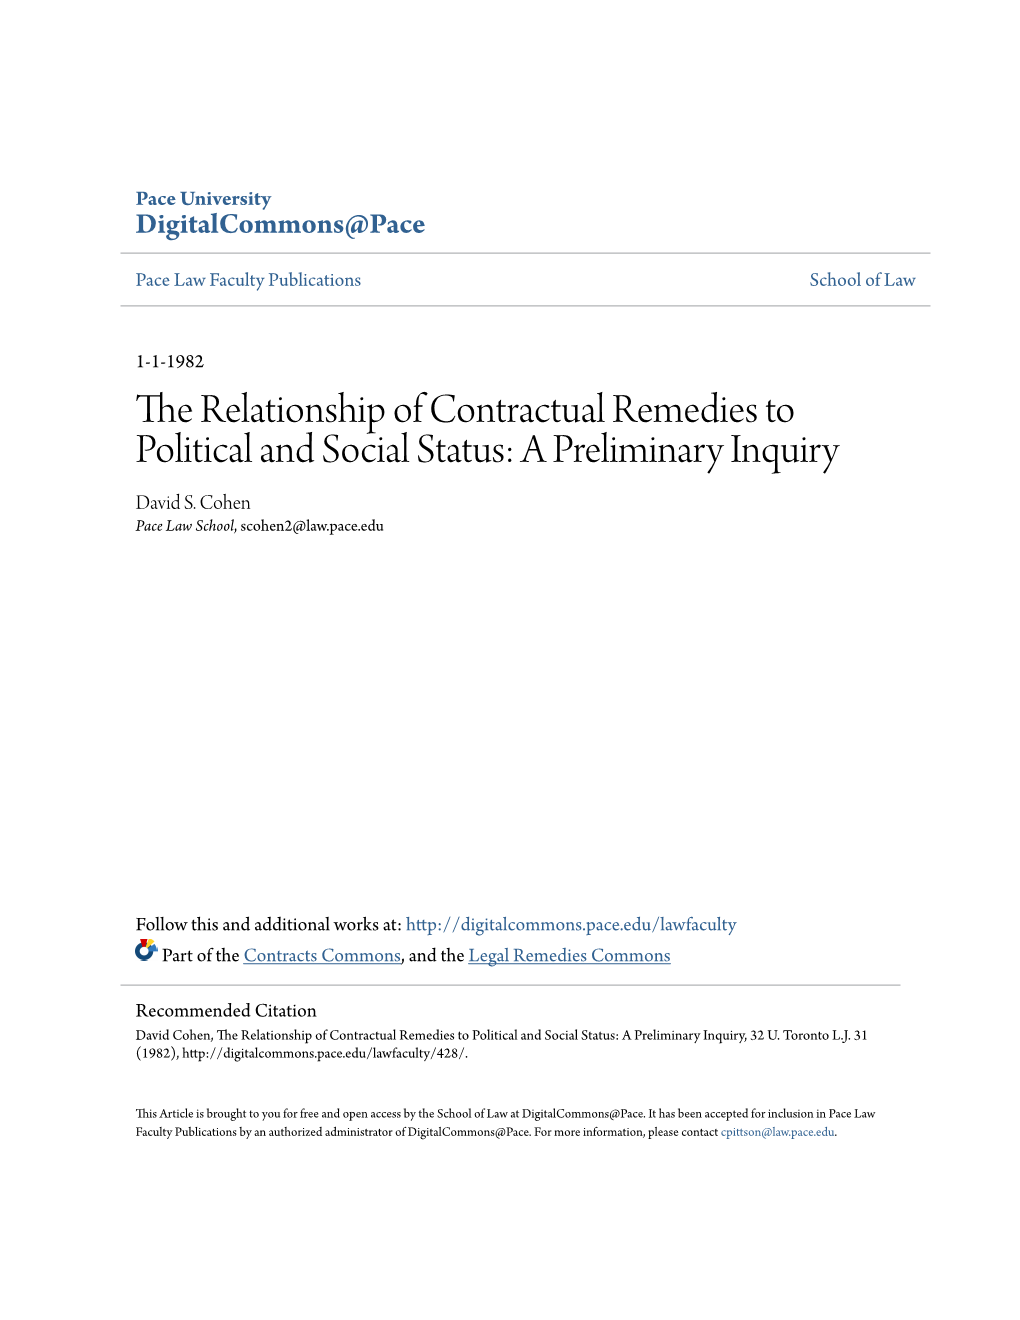 The Relationship of Contractual Remedies to Political and Social Status: a Preliminary Inquiry David S